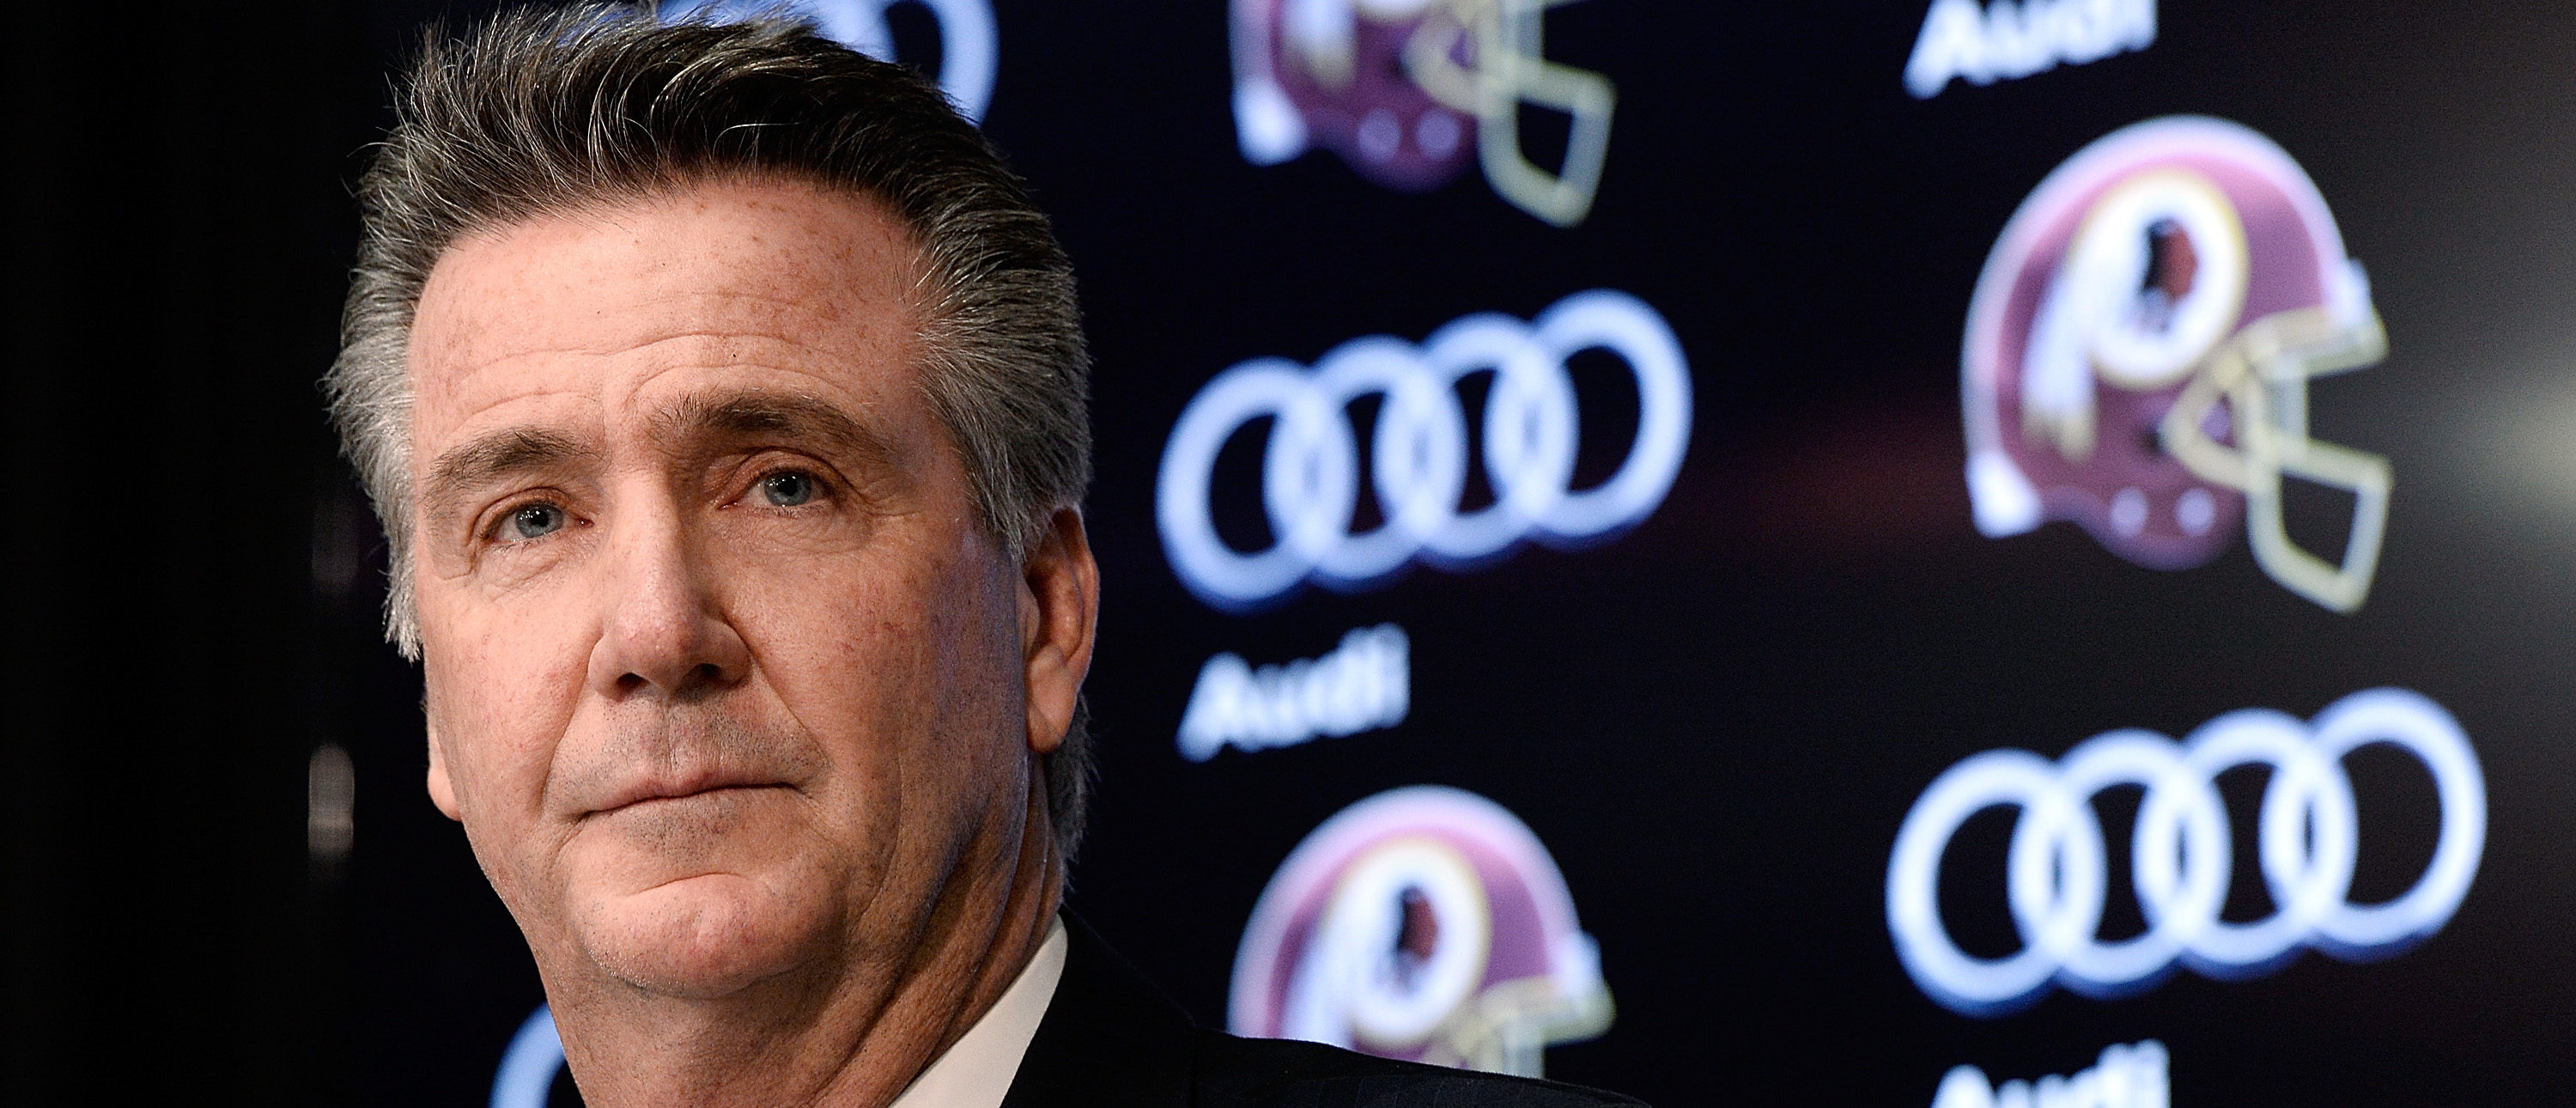 ASHBURN, VA - JANUARY 09:  Washington Redskins Executive Vice President and General Manager Bruce Allen speaks as Jay Gruden is introduced as the new head coach of the Washington Redskins at a press conference at Redskins Park on January 9, 2014 in Ashburn, Virginia.  (Photo by Patrick McDermott/Getty Images)